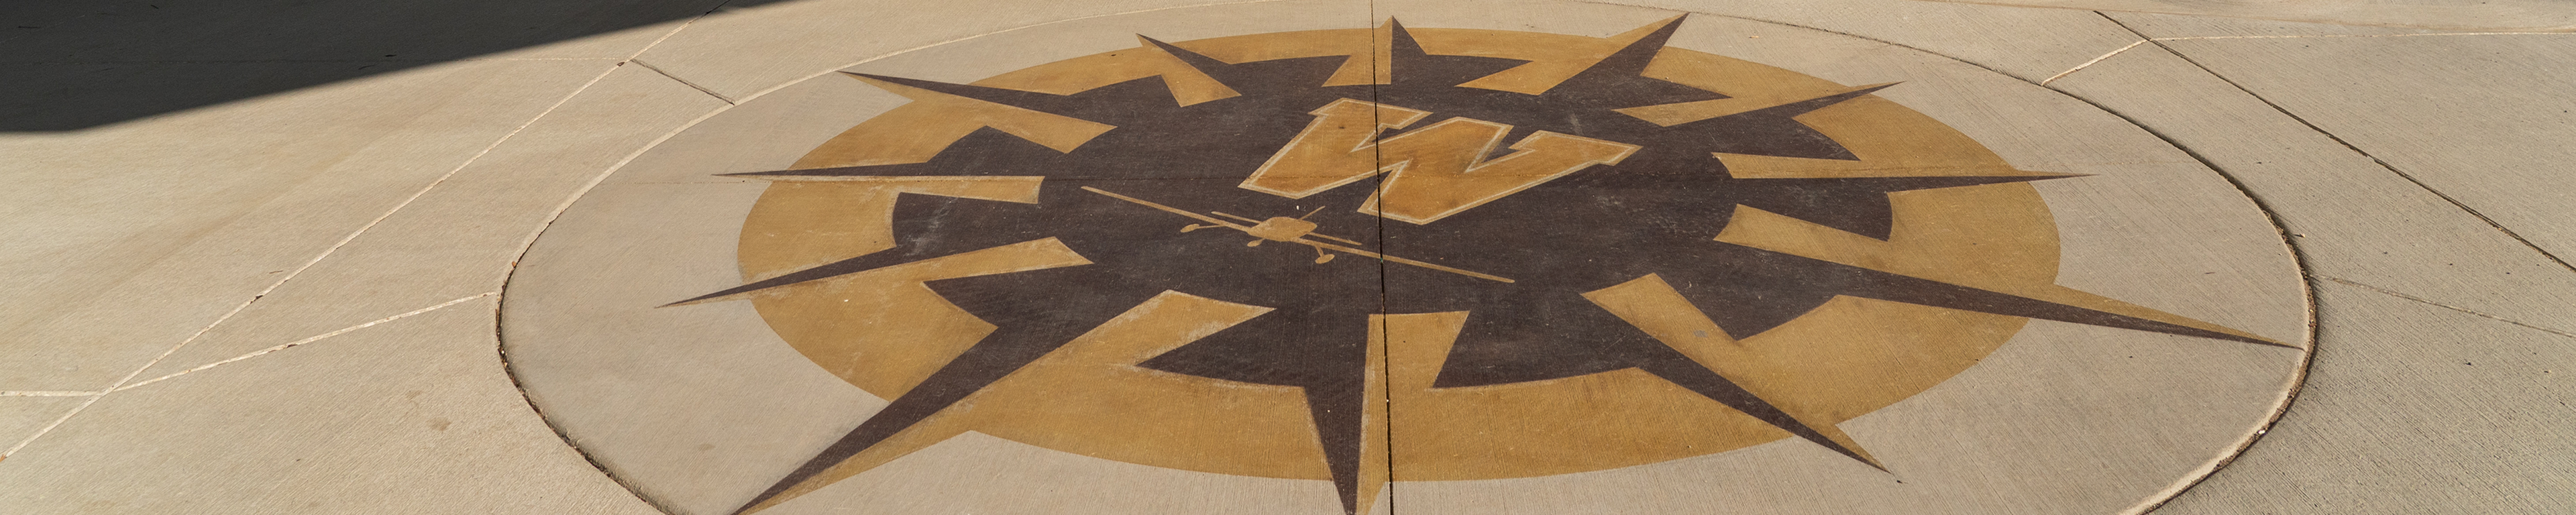 A WMU compass mural on concrete at WMU's Aviation Education Center in Battle Creek